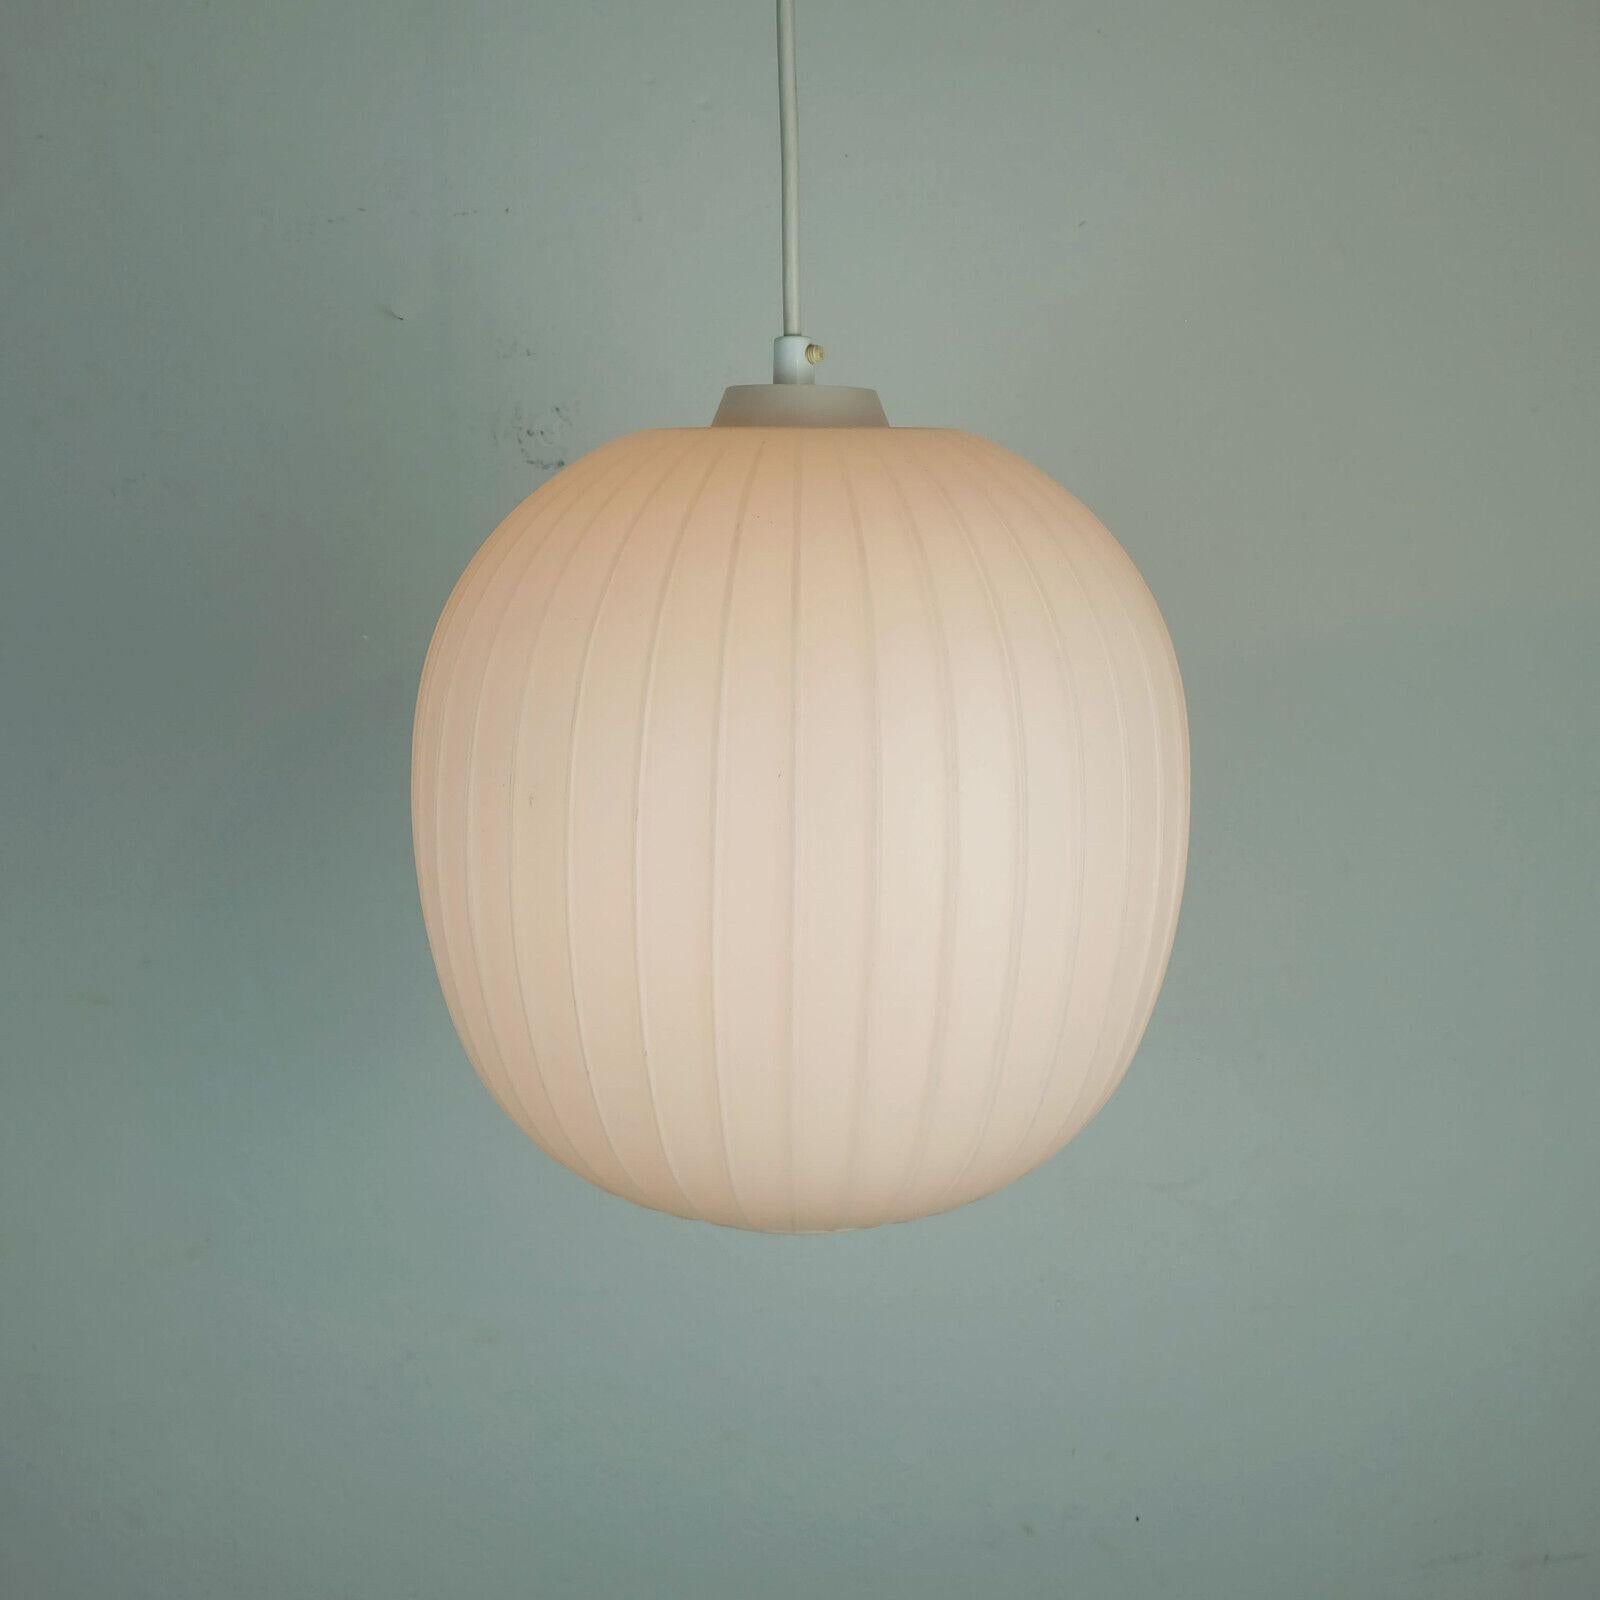 Very elegant classic hanging lamp manufactured by Peill & Putzler. Designed by Aloys Ferdinand Gangkofner in the 1950s. Large round white opaline glass shade with stripe relief surface.

Dimensions in cm:
Overall length from ceiling 130 cm (can be